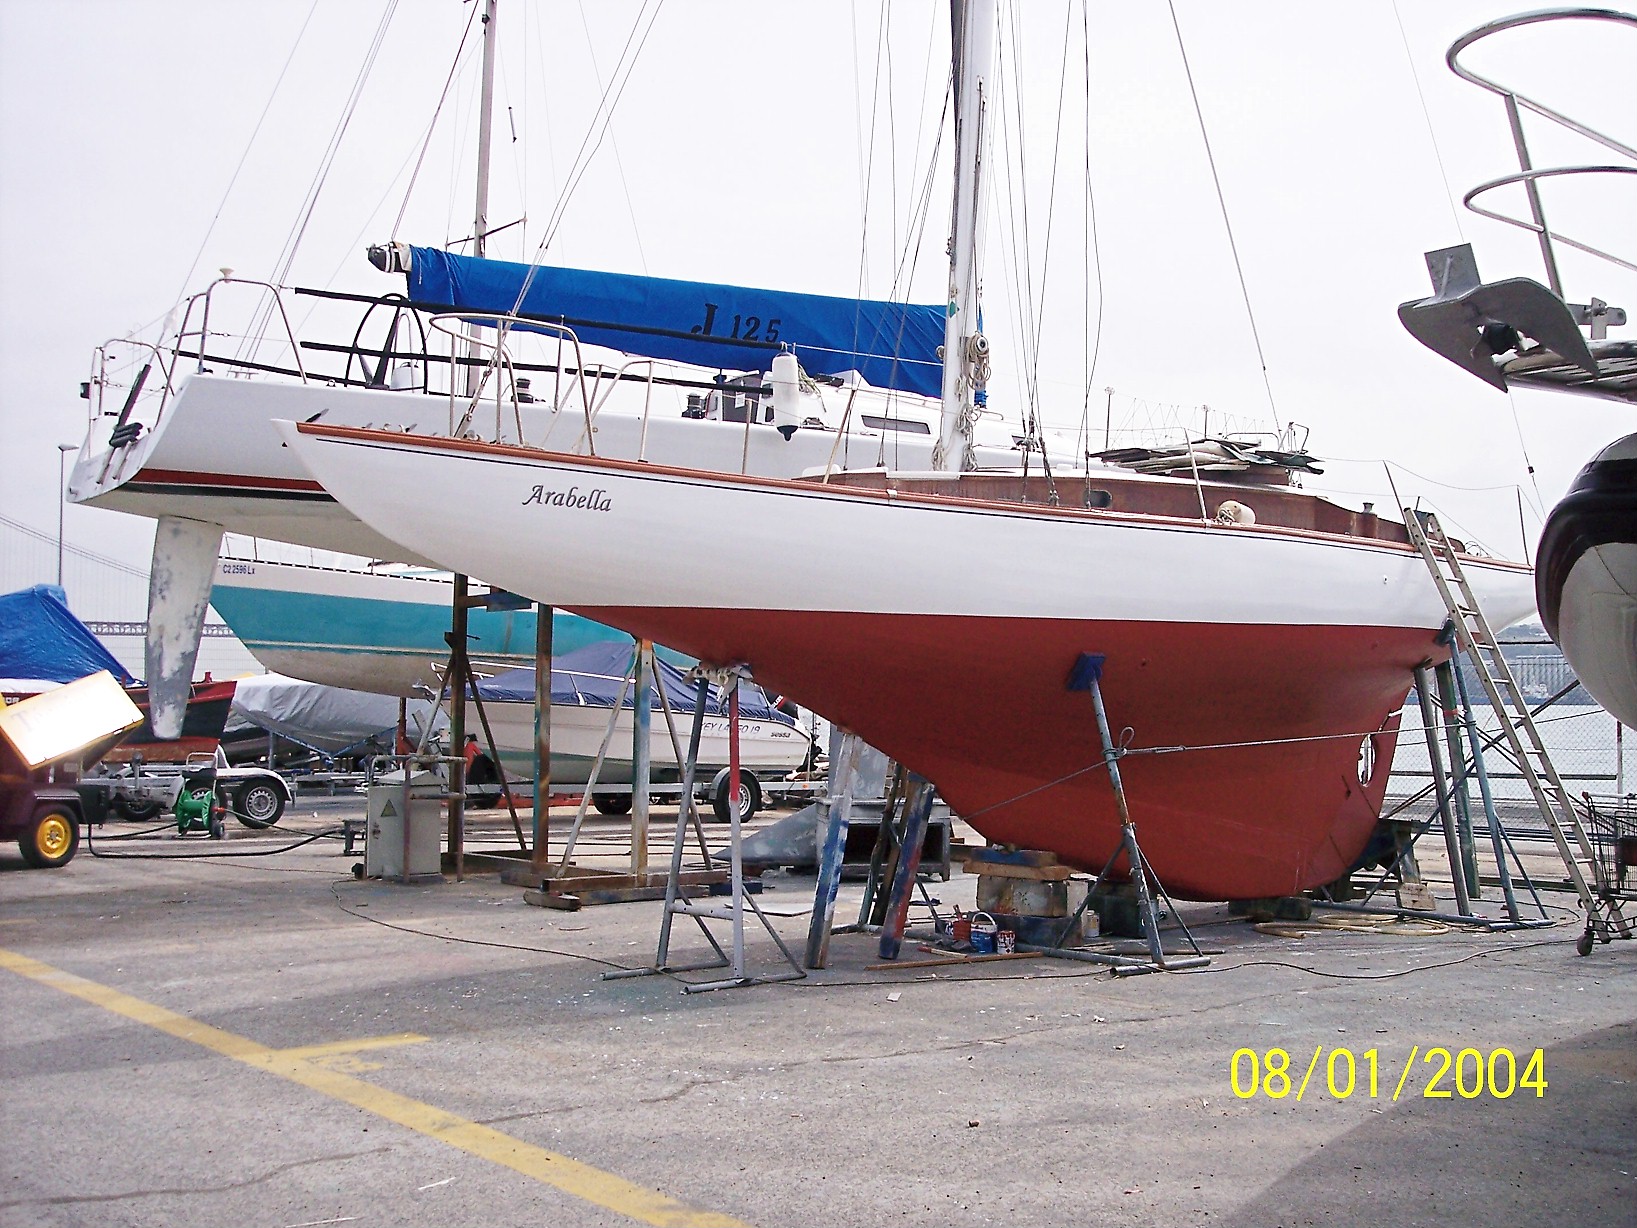 A white yacht with a red keel, on the hard.